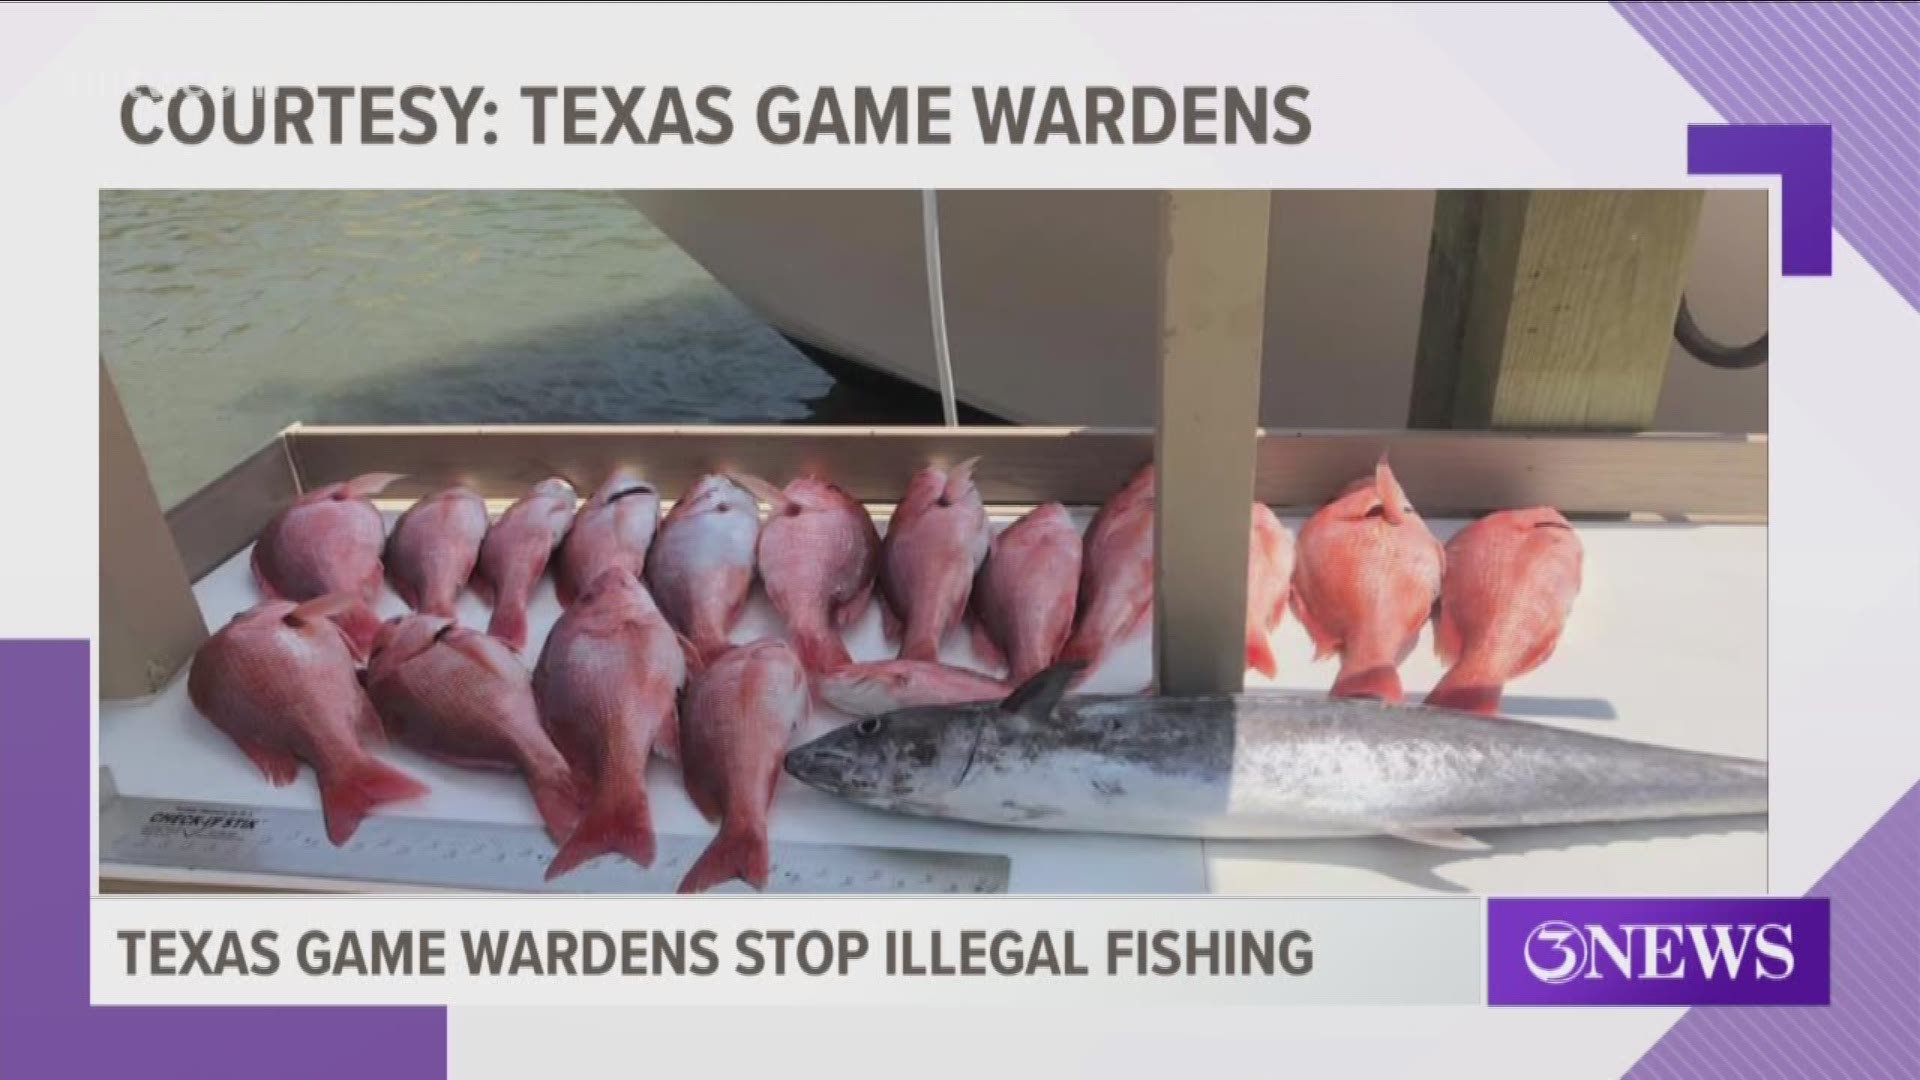 All of the fish were caught in federal waters, which are closed for snapper fishing.